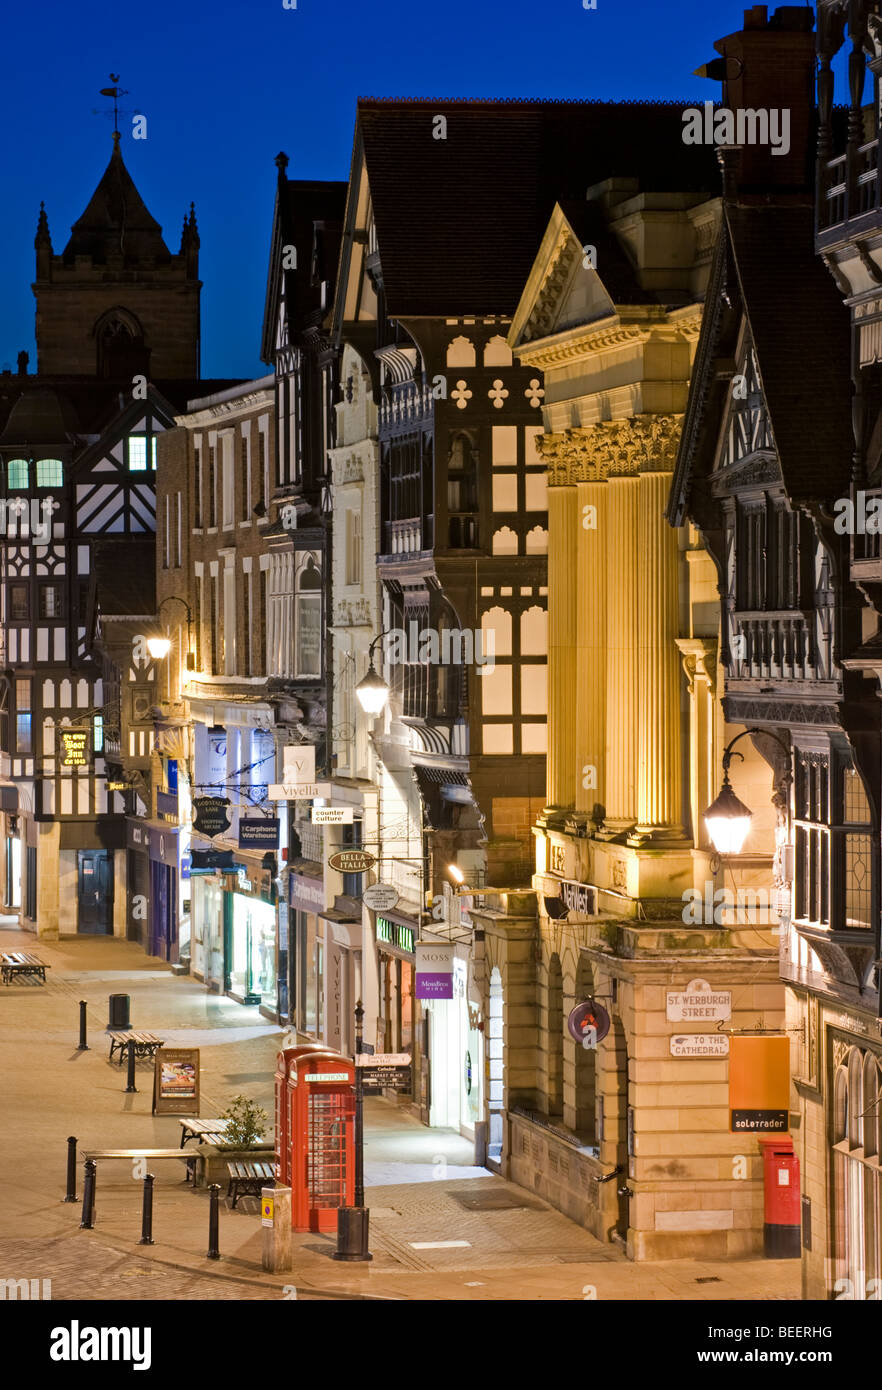 Medieval Rows Buildings on Eastgate Street at Night, Chester, Cheshire, England, UK Stock Photo